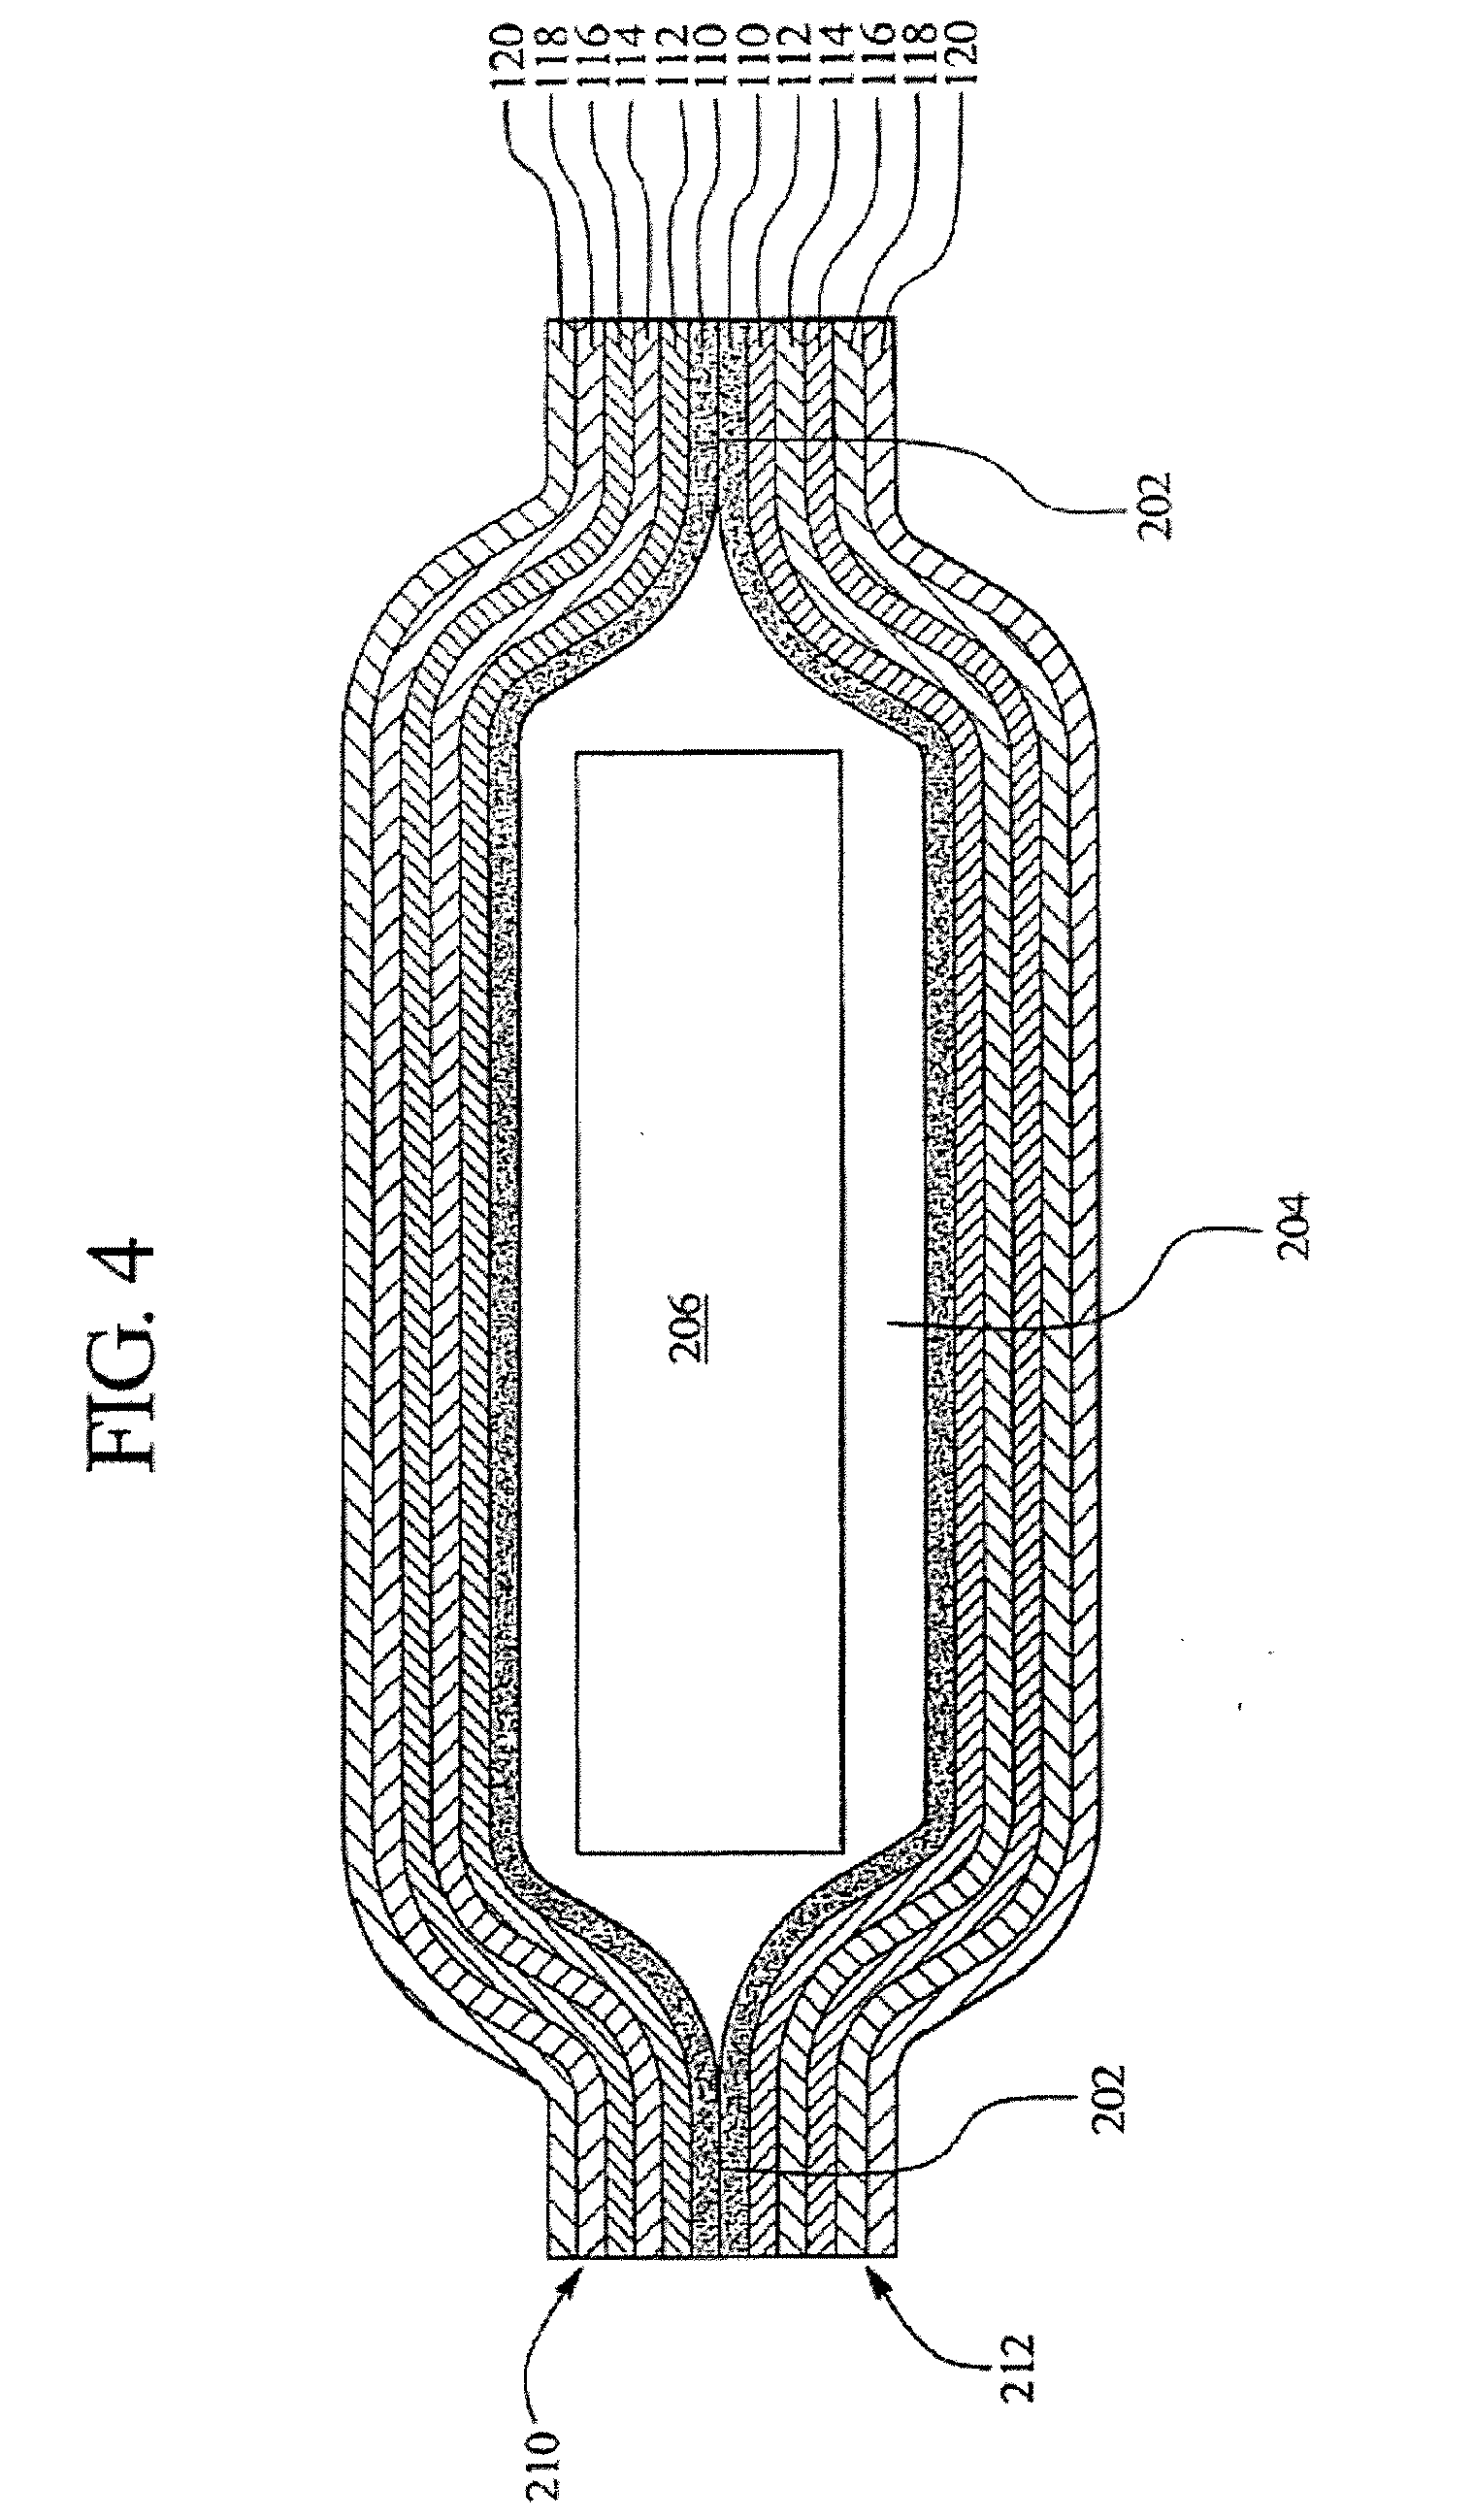 Films having a desiccant material incorporated therein and methods of use and manufacture